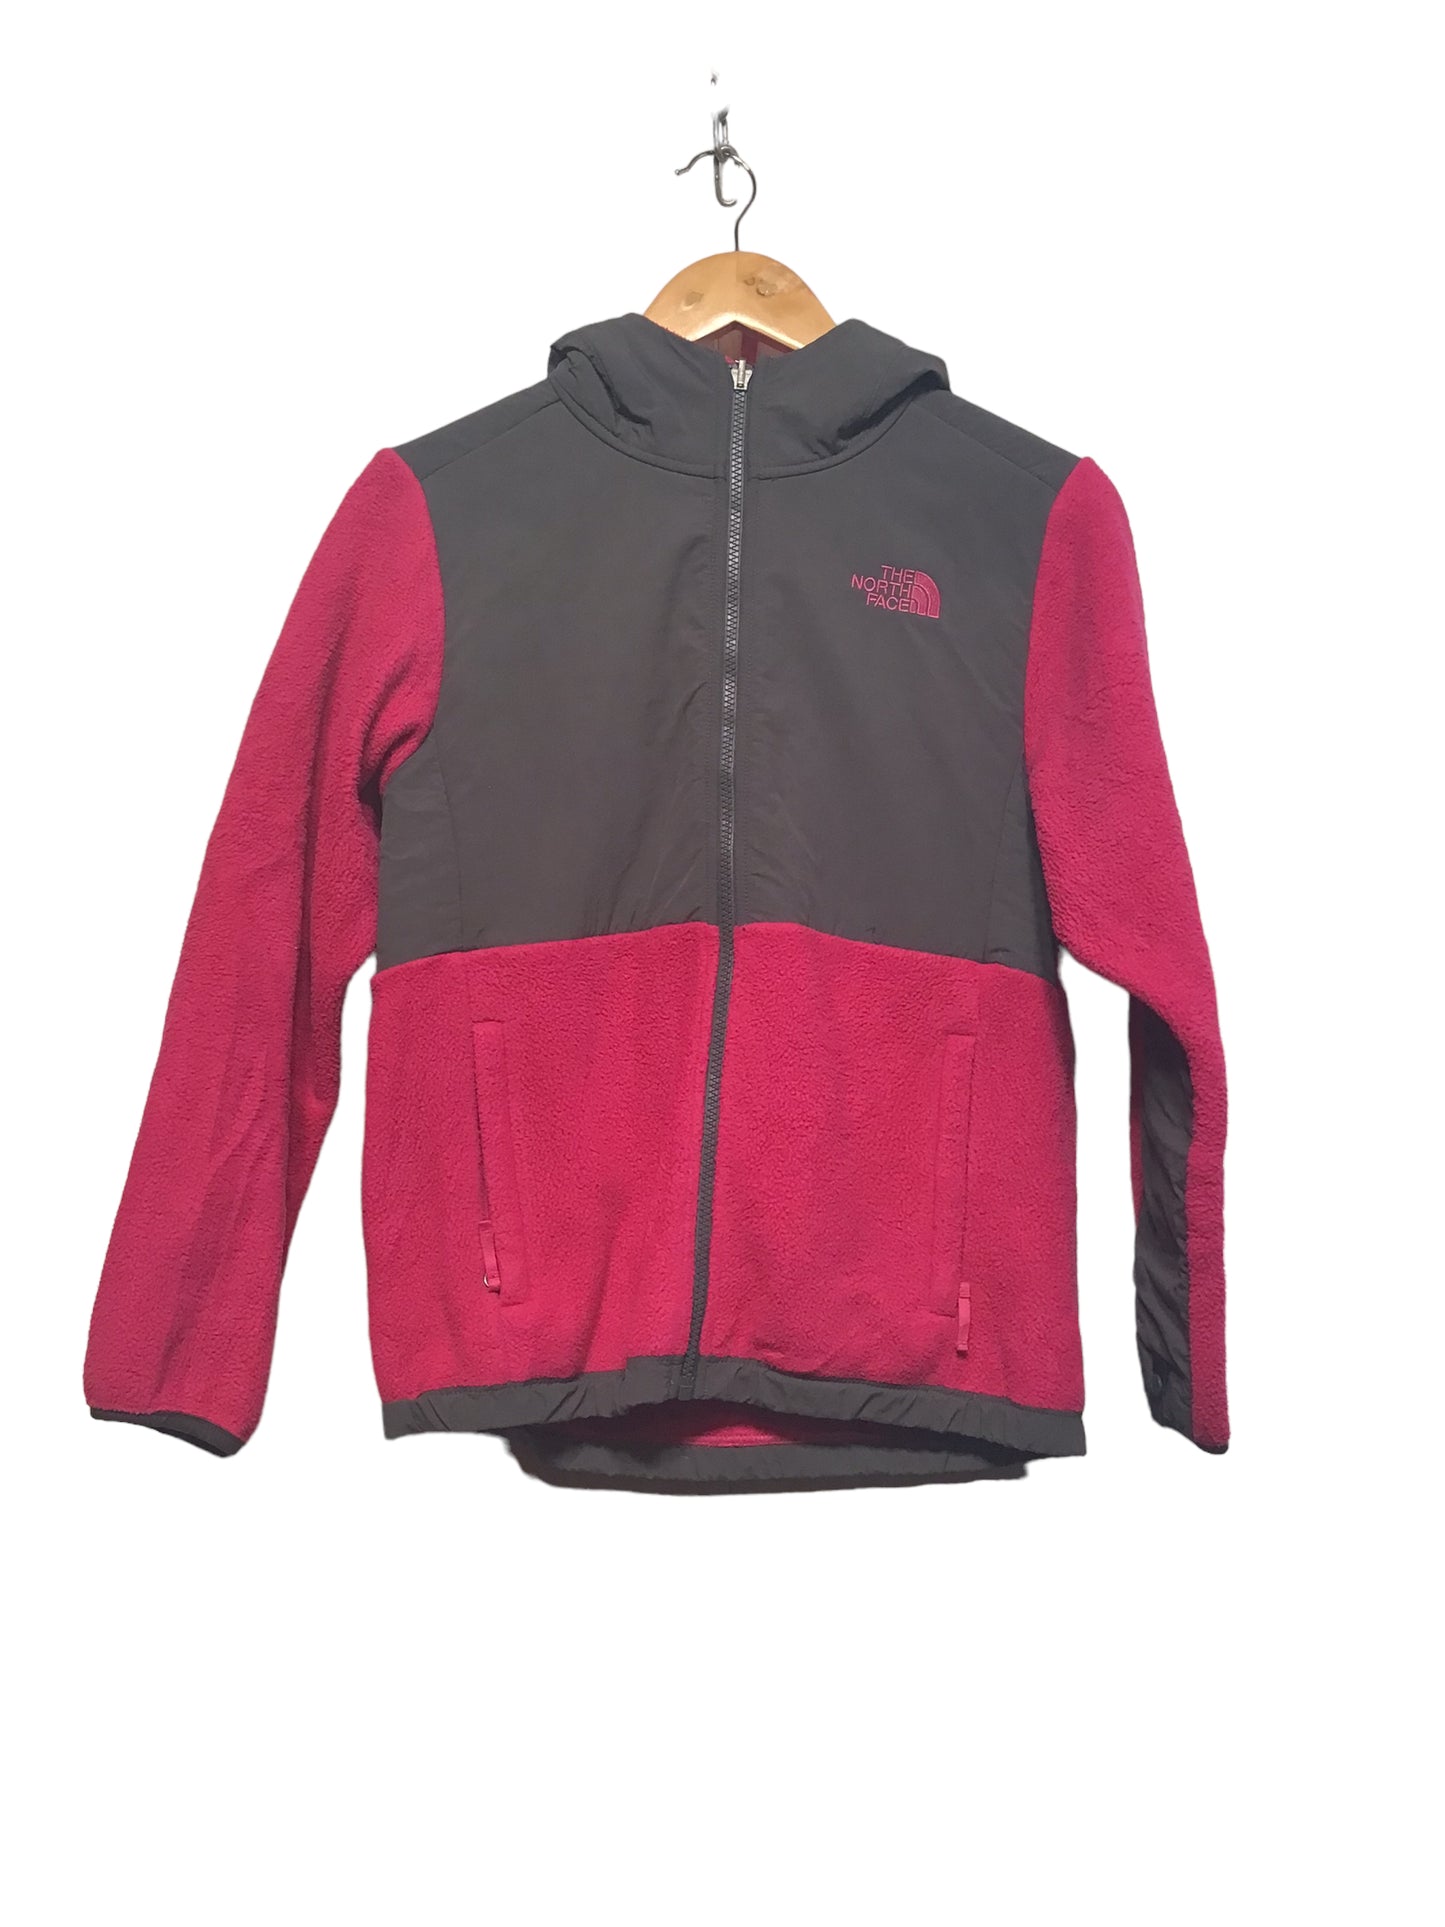 The North Face Pink Denali Jacket (Women’s Size S)